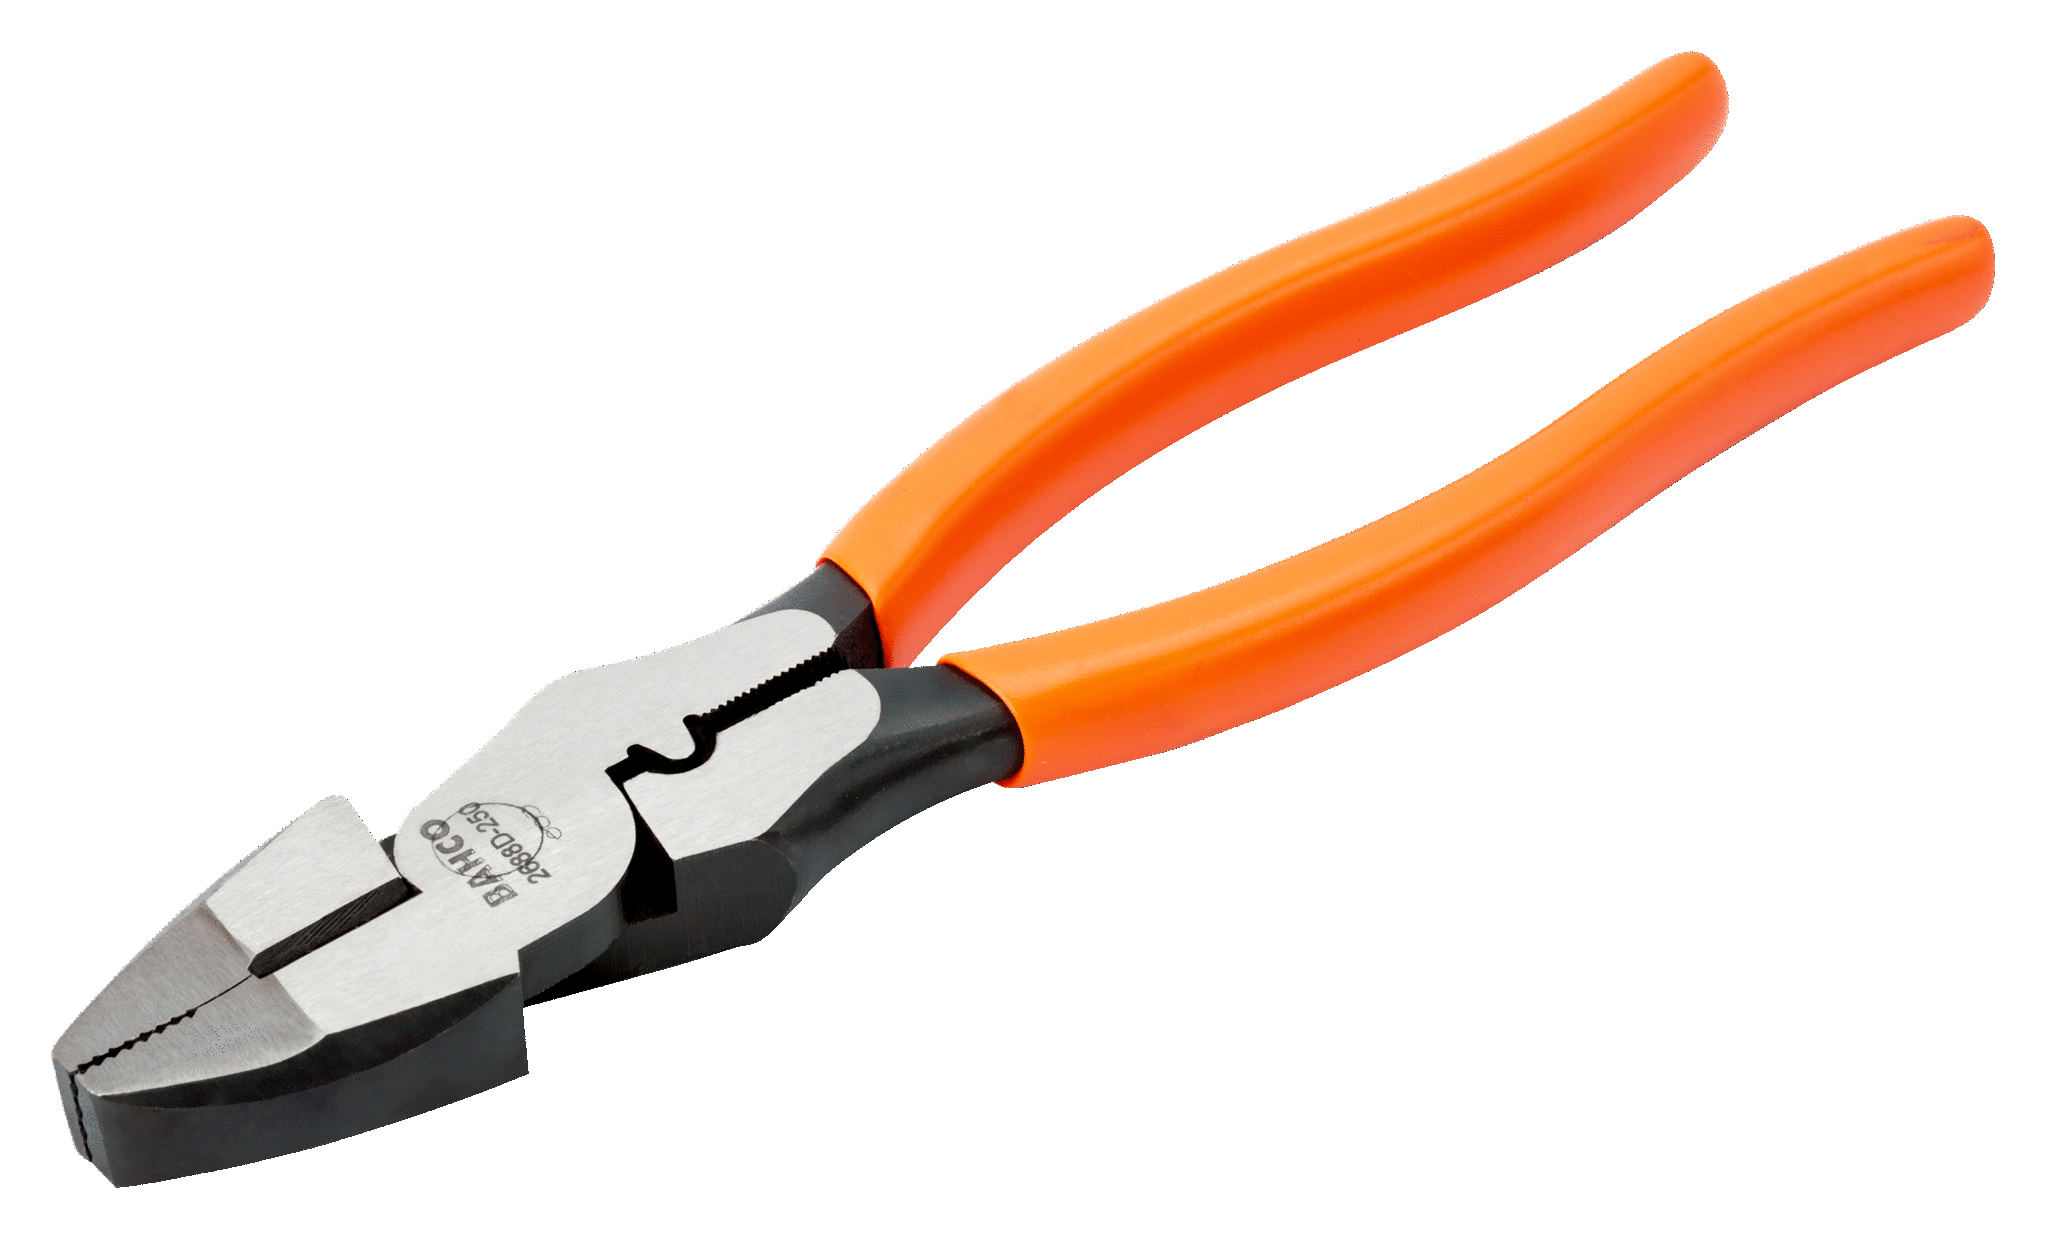 High Leverage Universal Combination Pliers with PVC Coated Handles